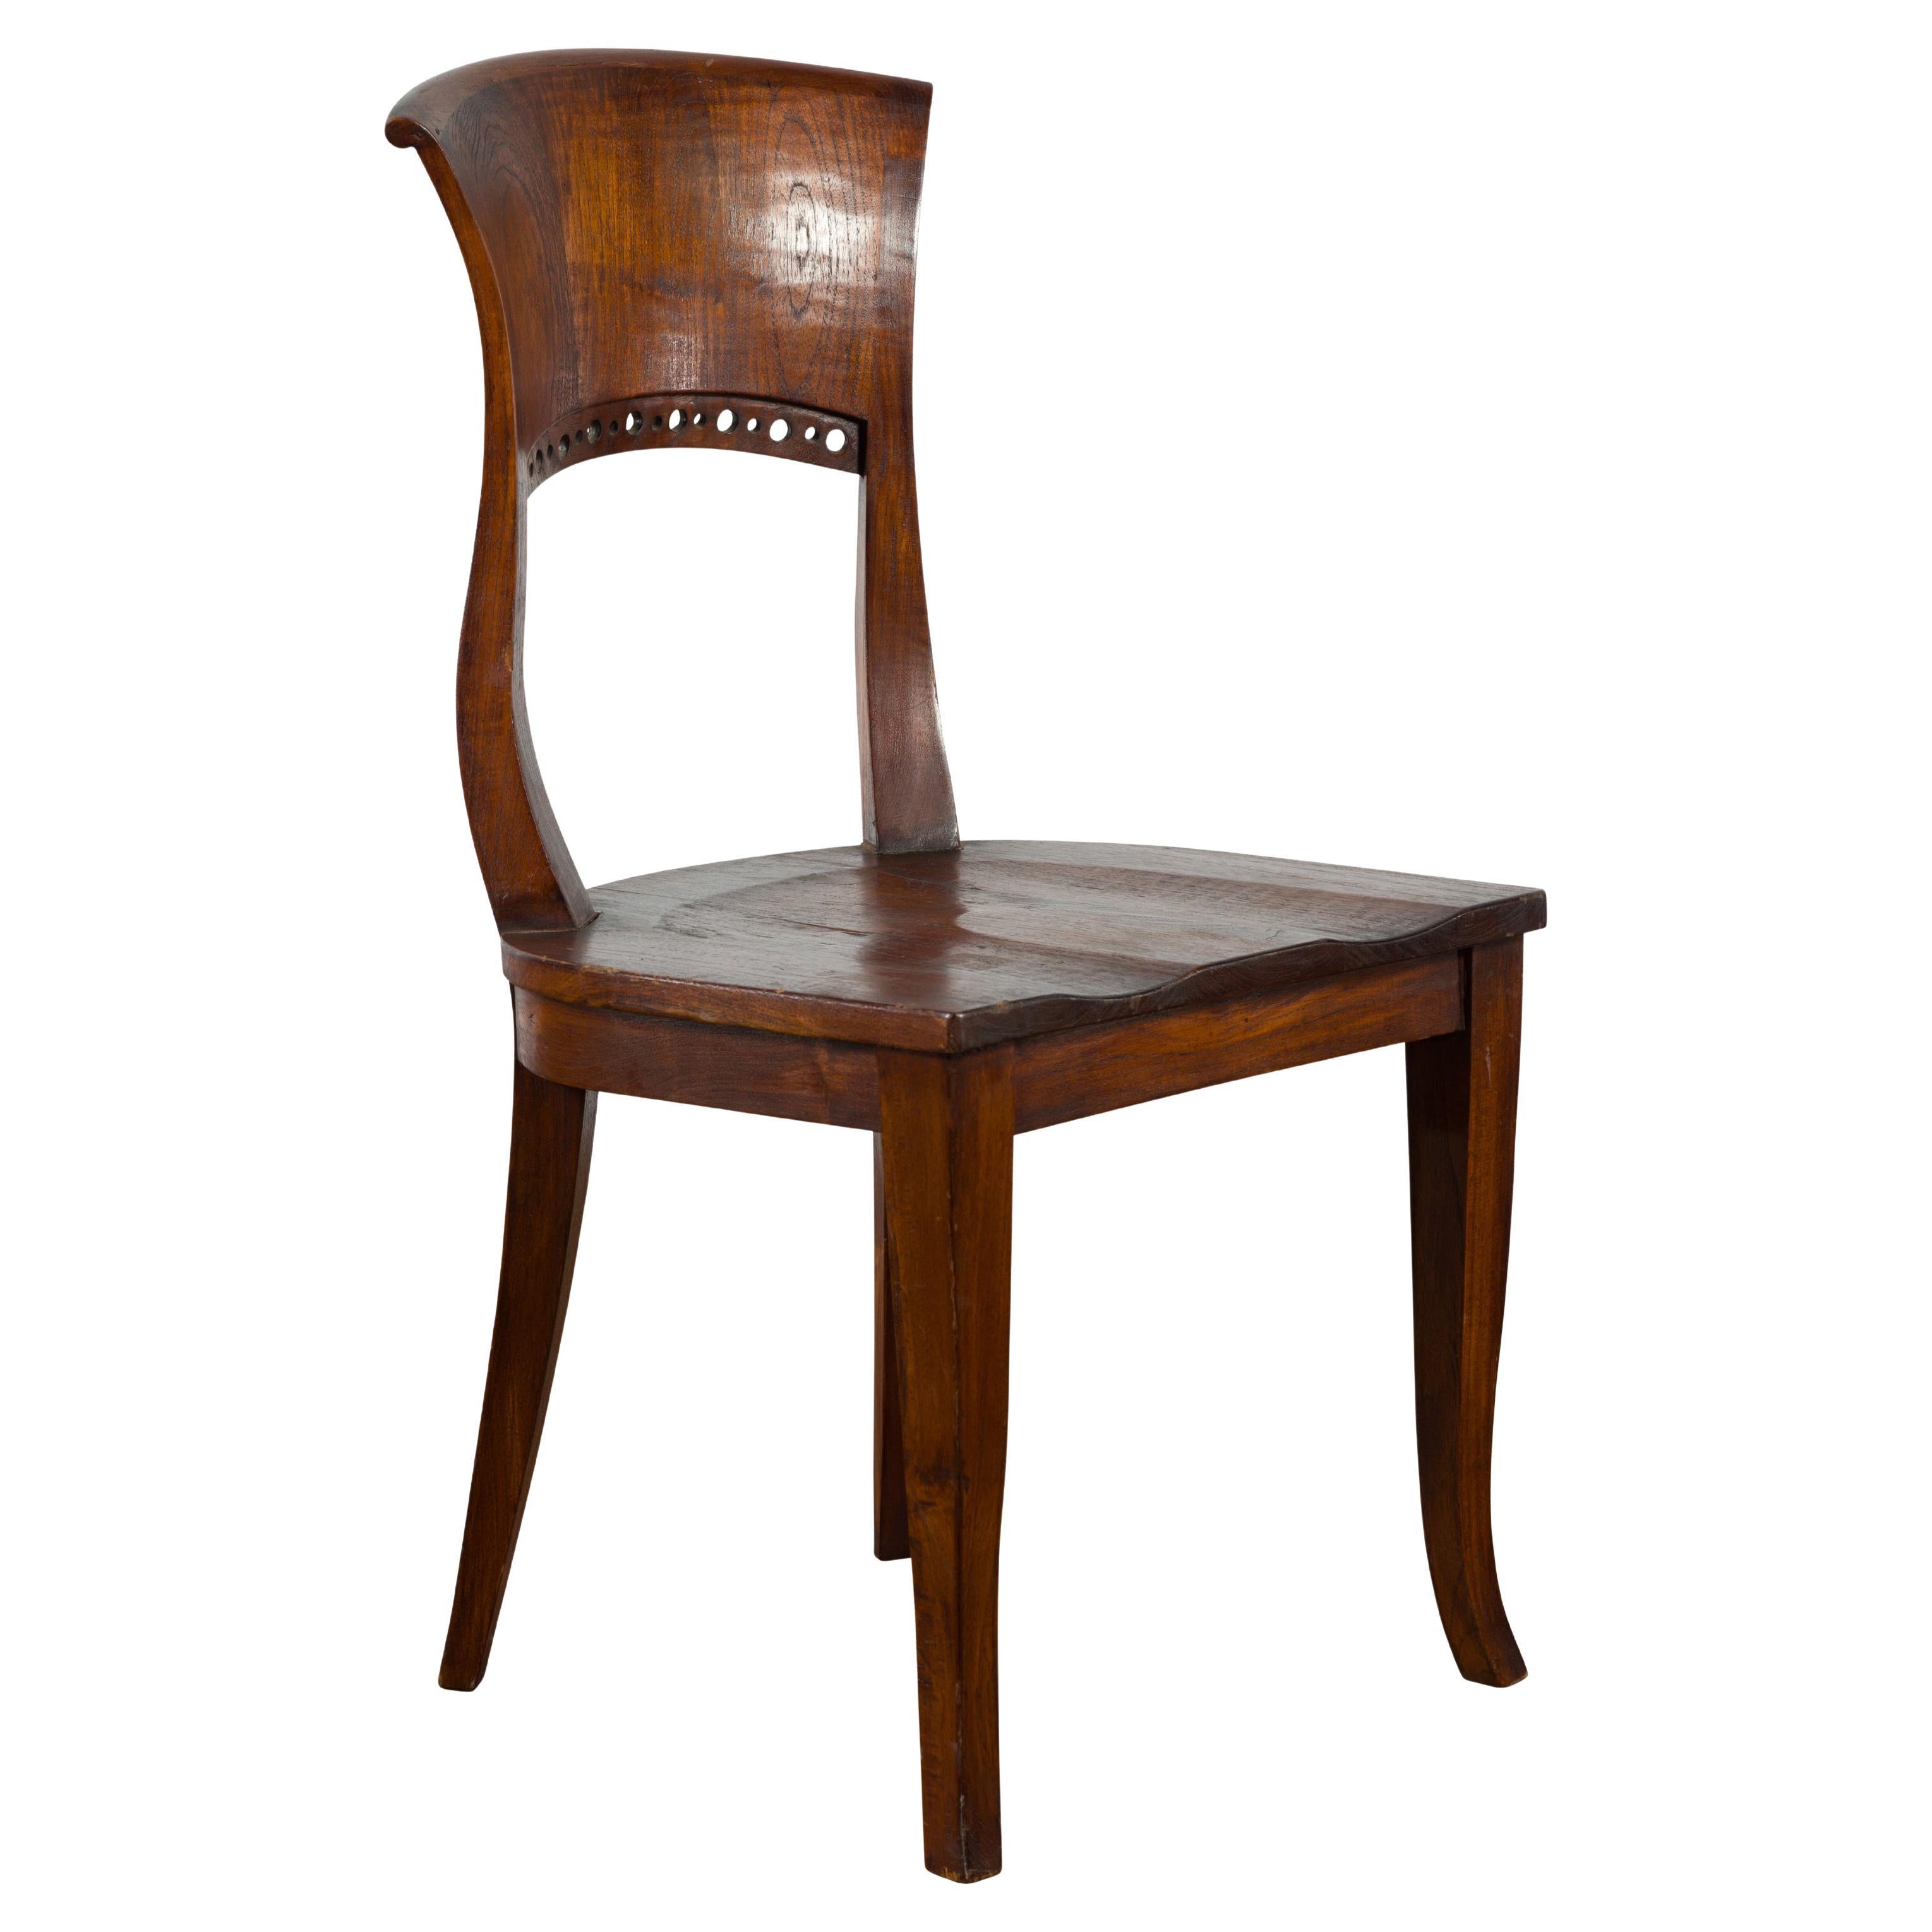 Vintage Indonesia Wooden Accent Chair with Pierced Circular Motifs Curving Back For Sale